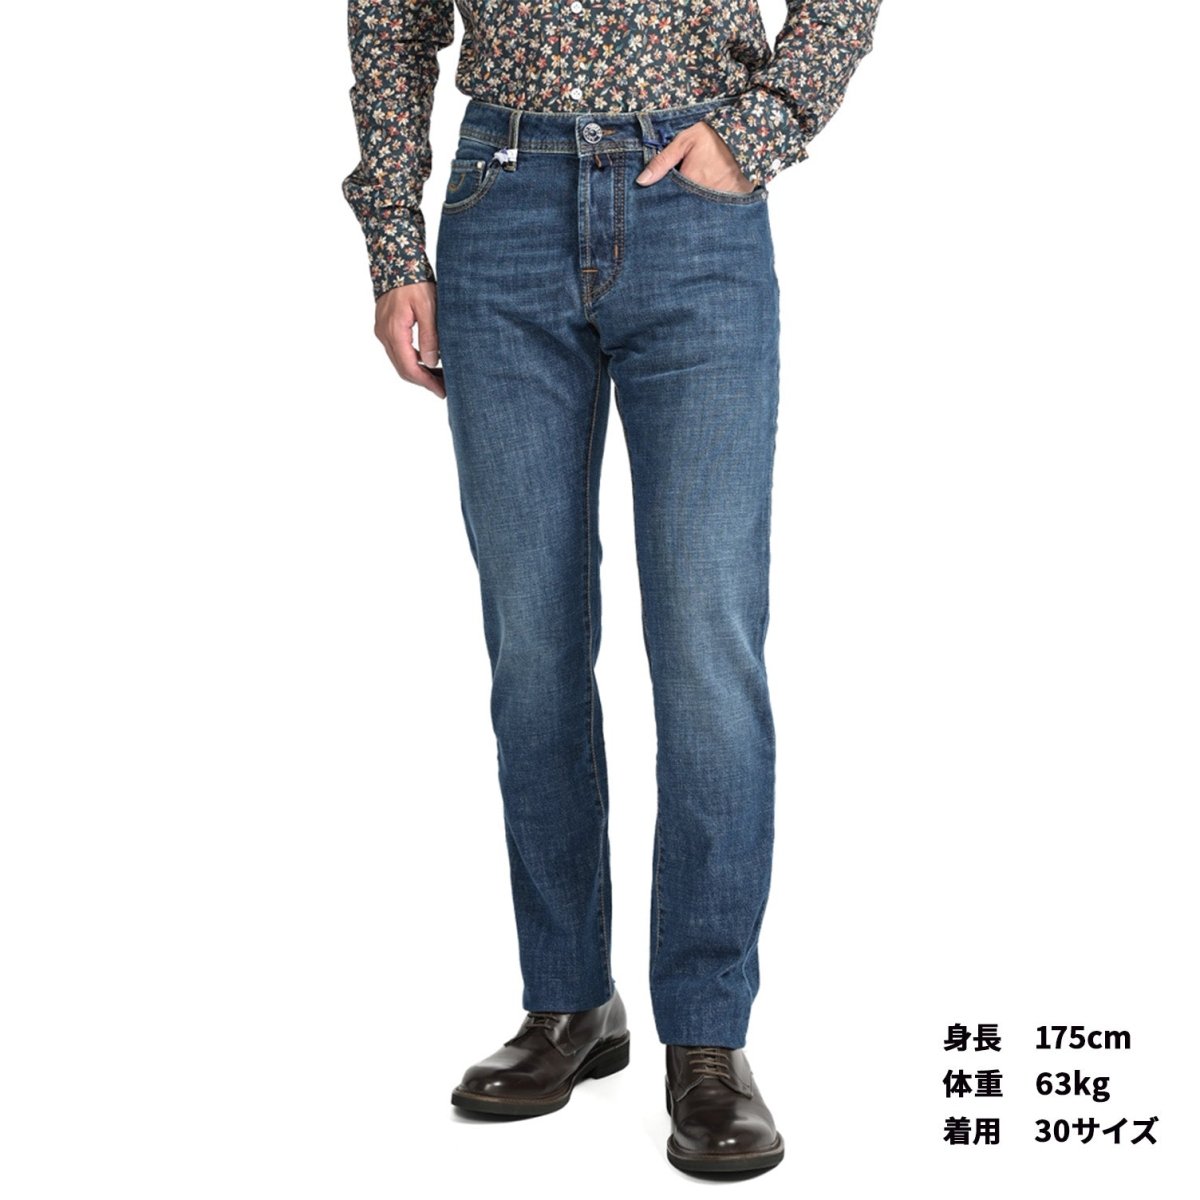 23-24AW JACOB COHEN "BARD(J688)" SLIM FIT ストレッチデニムジーンズ｜GUARDAROBA MILANO OFFICIAL STORE